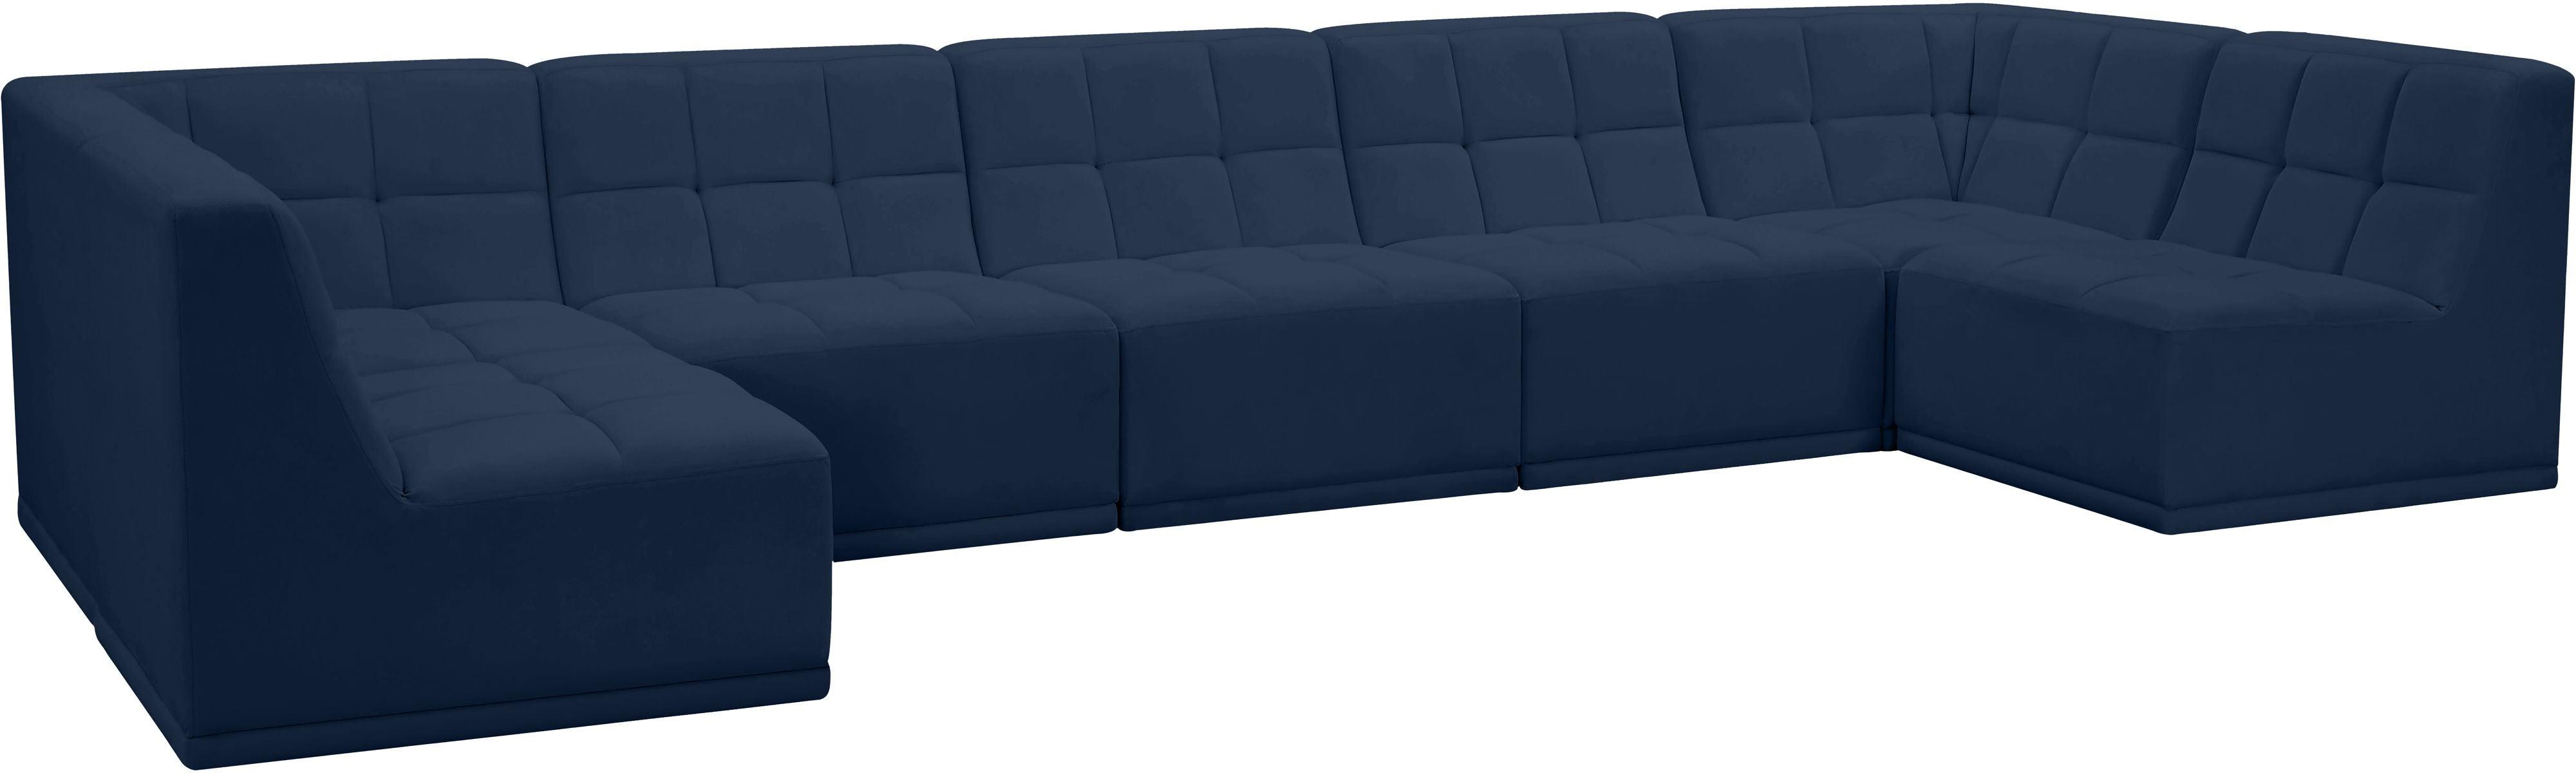 Meridian Furniture - Relax - Modular Sectional 7 Piece - Navy - 5th Avenue Furniture